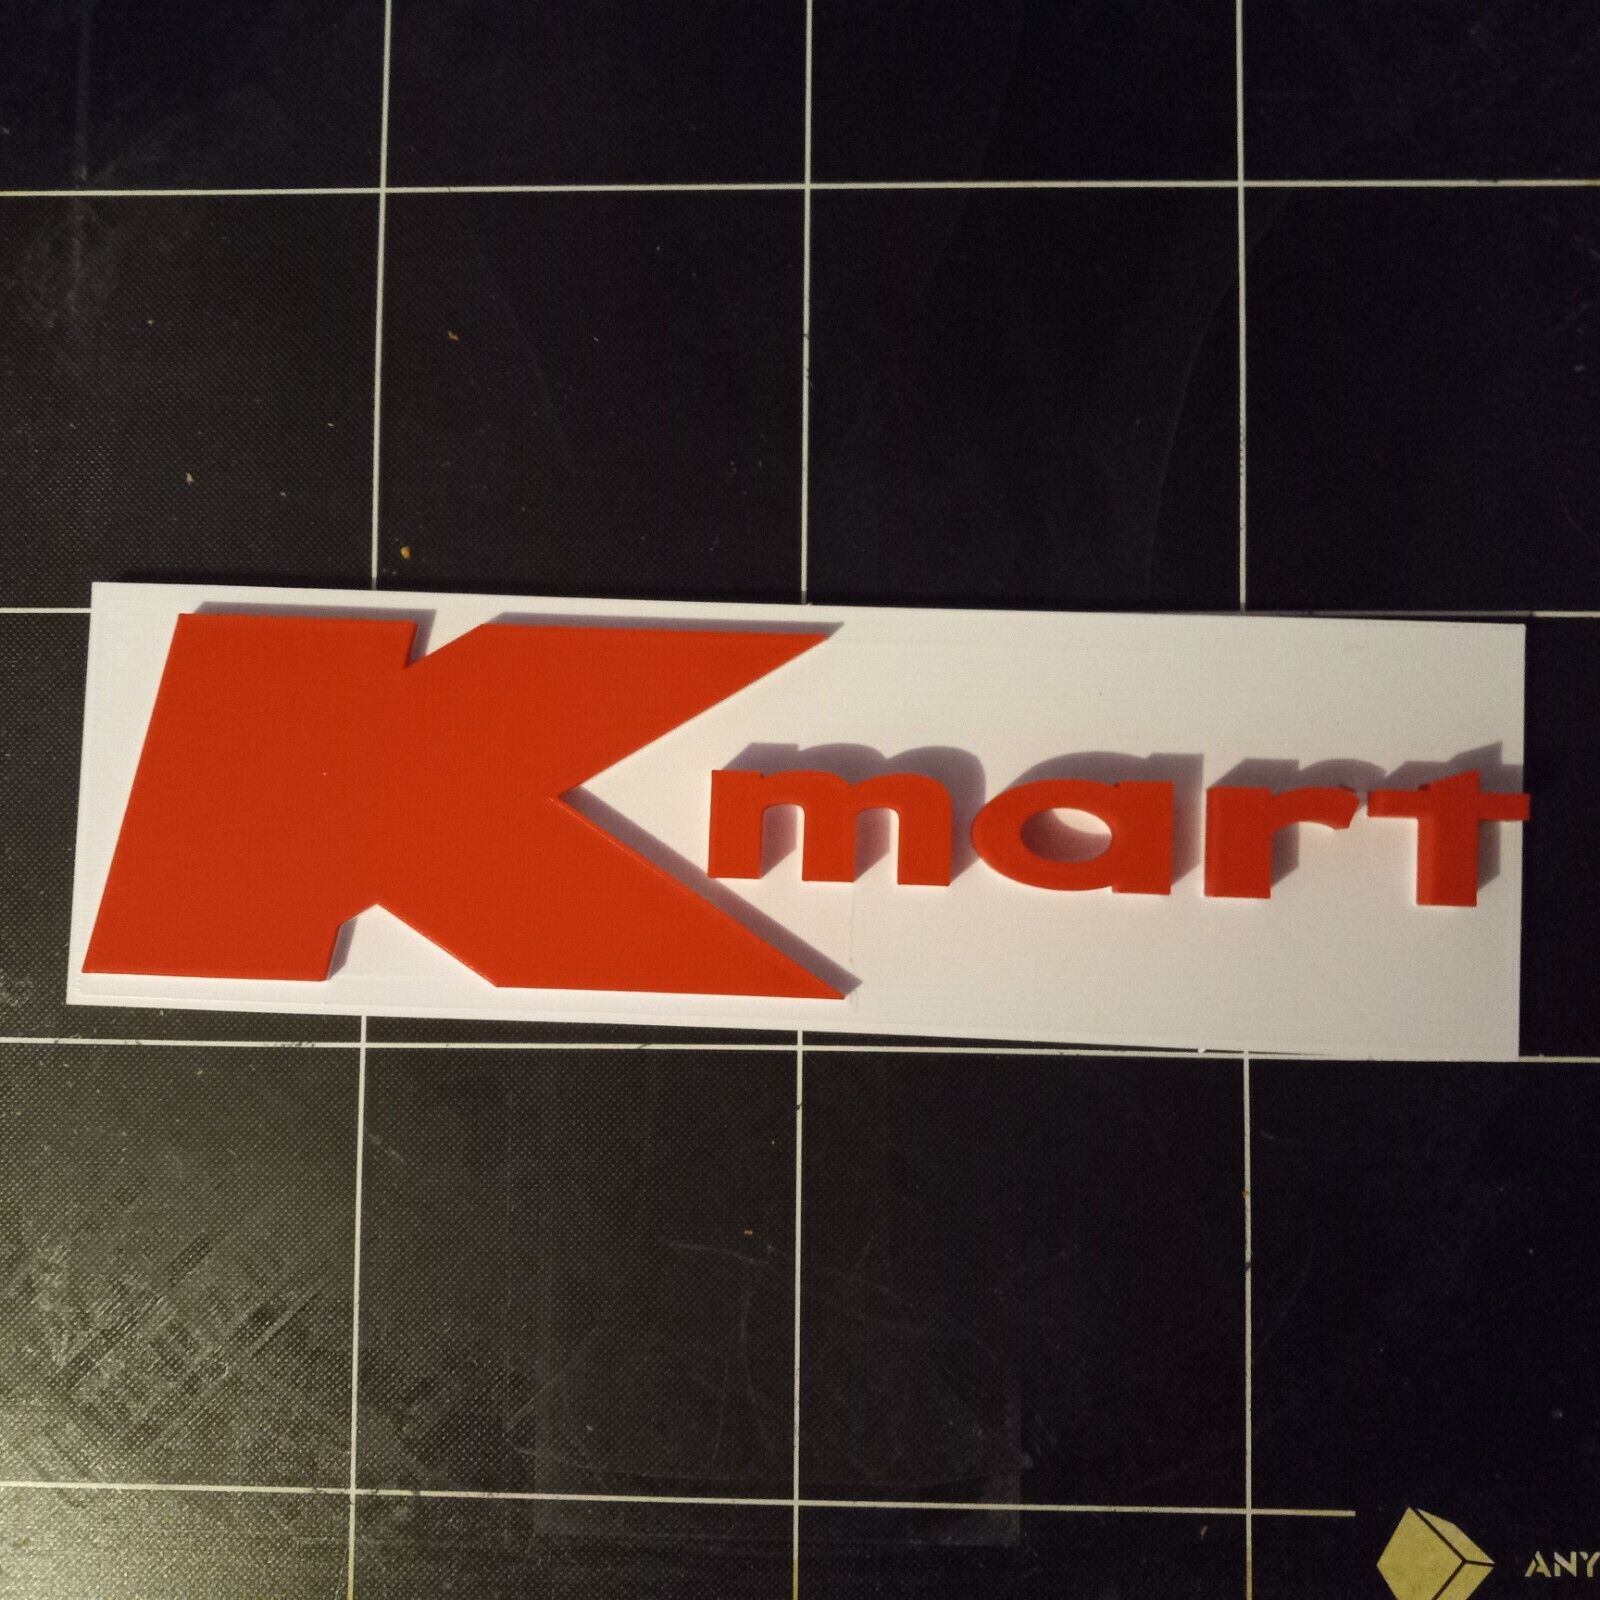 12 Inch Vintage Old Style 3D Kmart Sign, Red Version. 3D Reproduction Logo